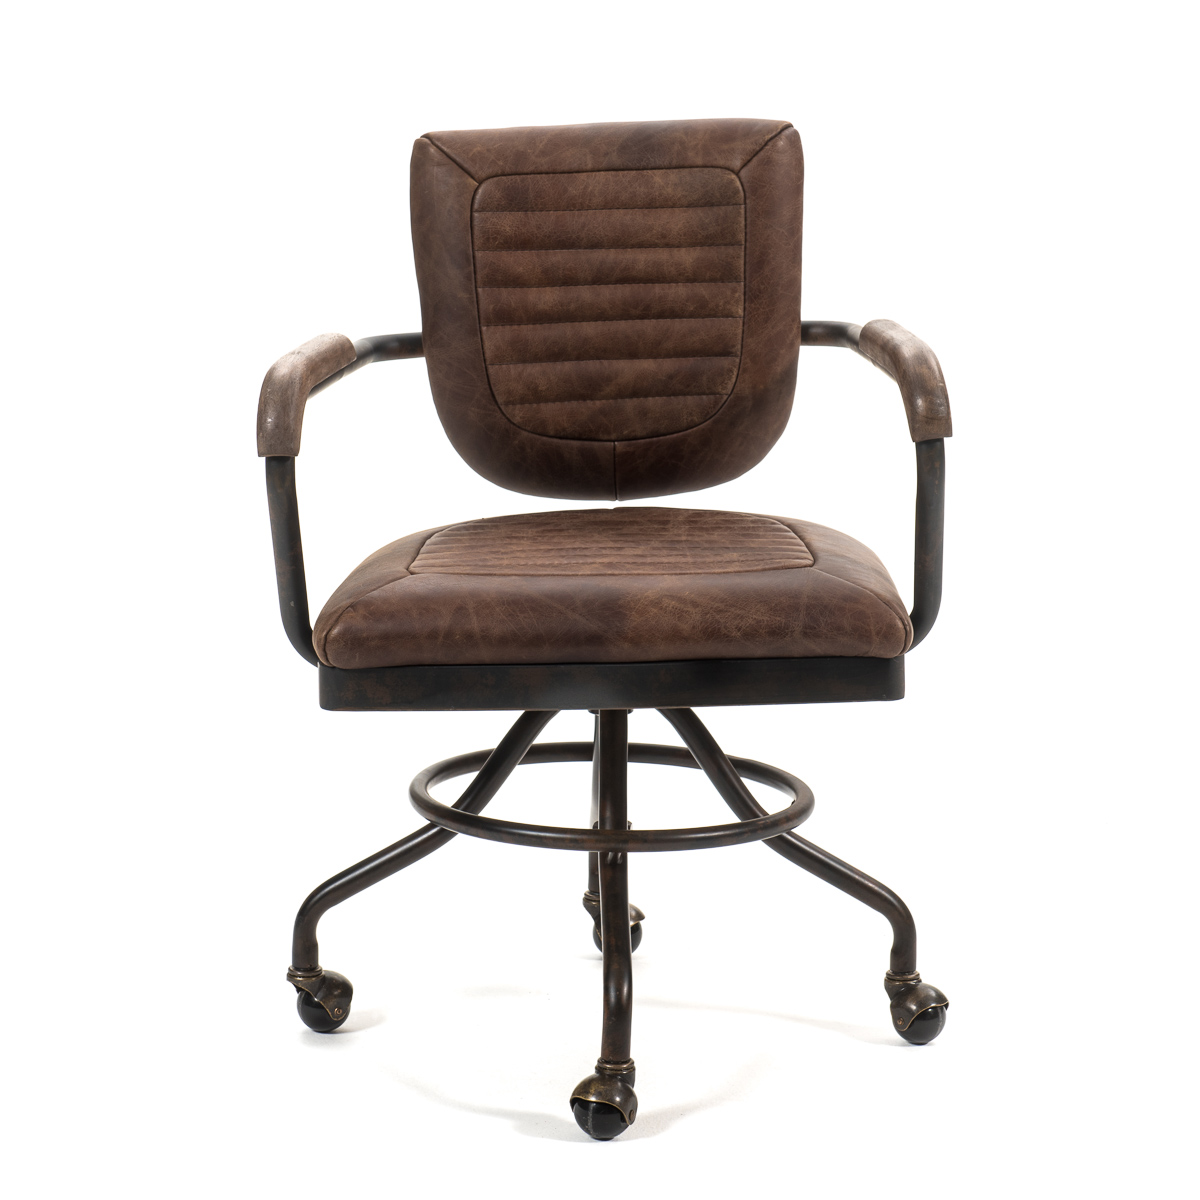 Mustang Office Chair